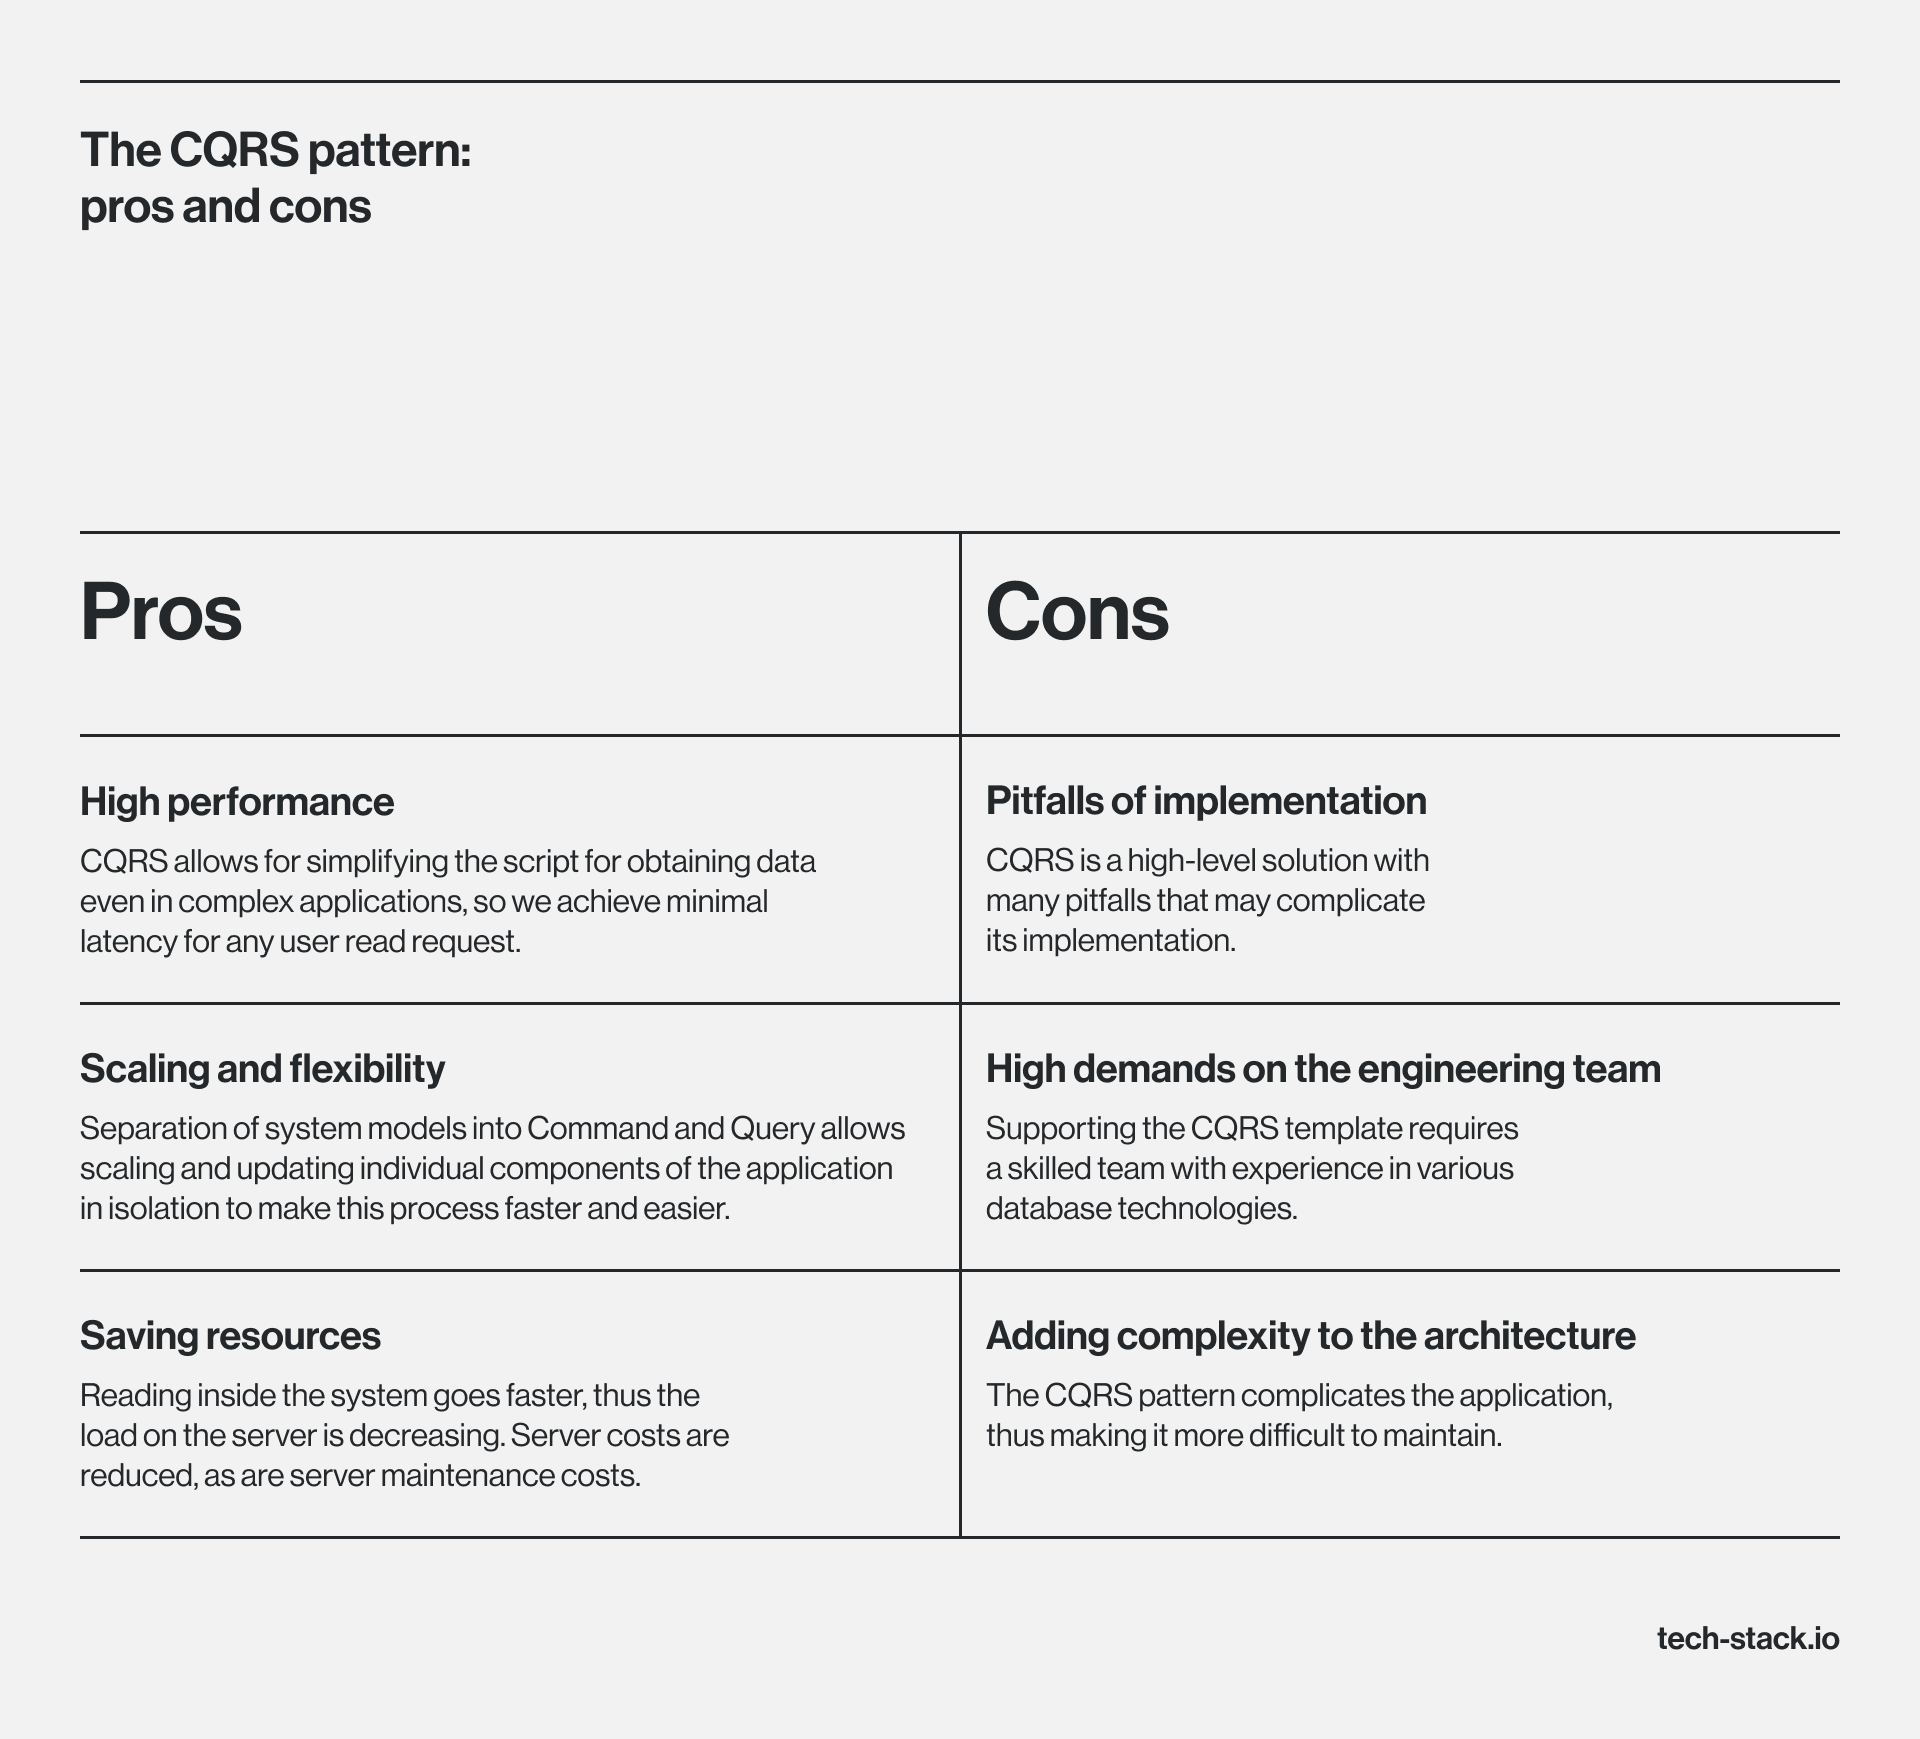 Pros and cons of CQRS